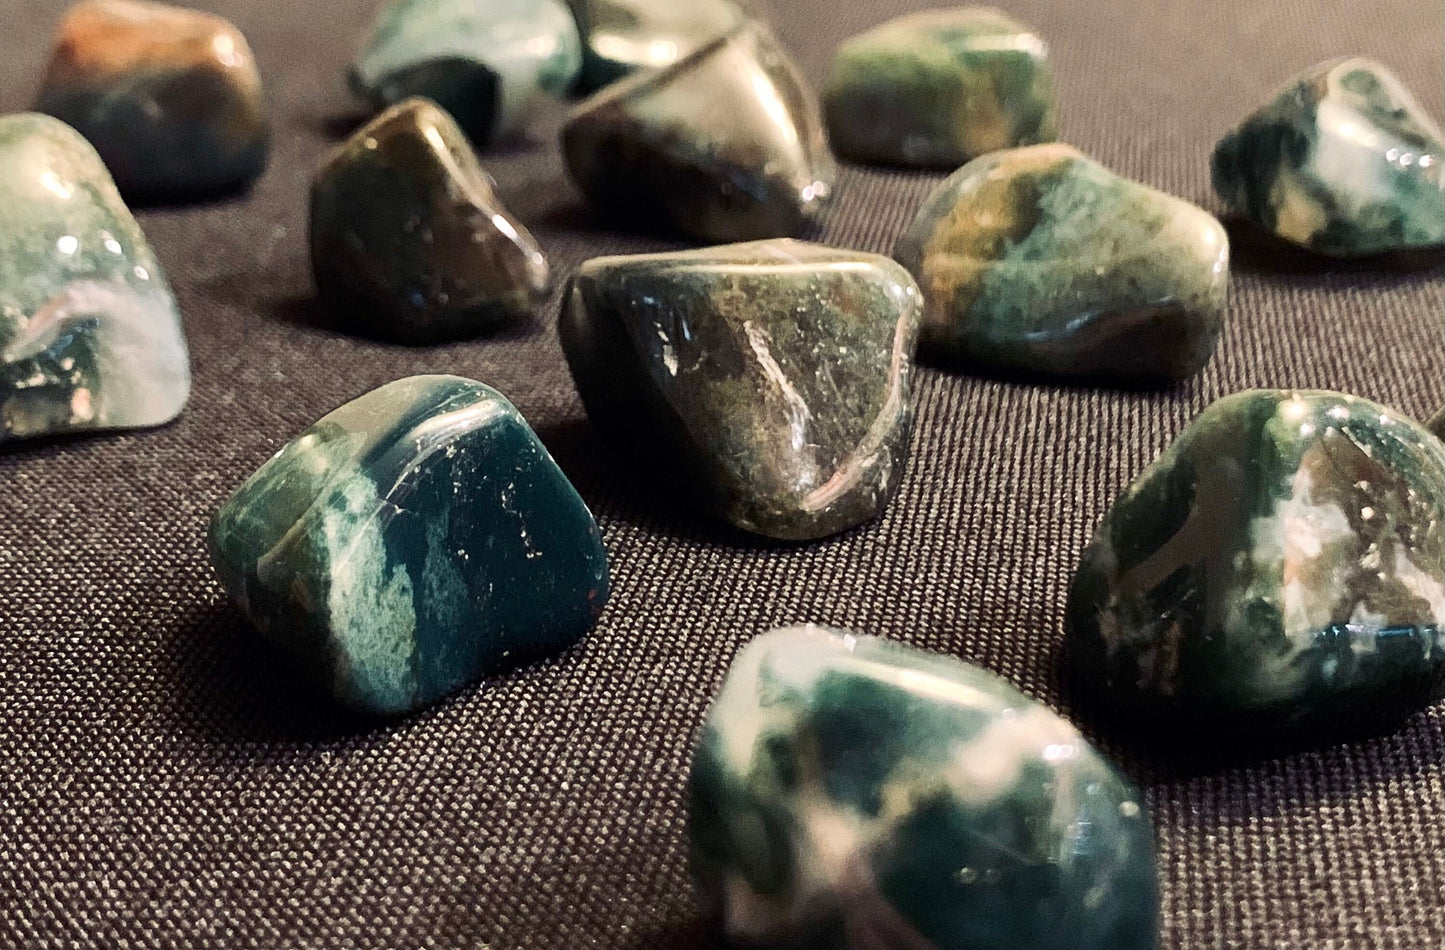 Green Moss Agate Tumbled Polished Stones Natural Crystal Gemstones